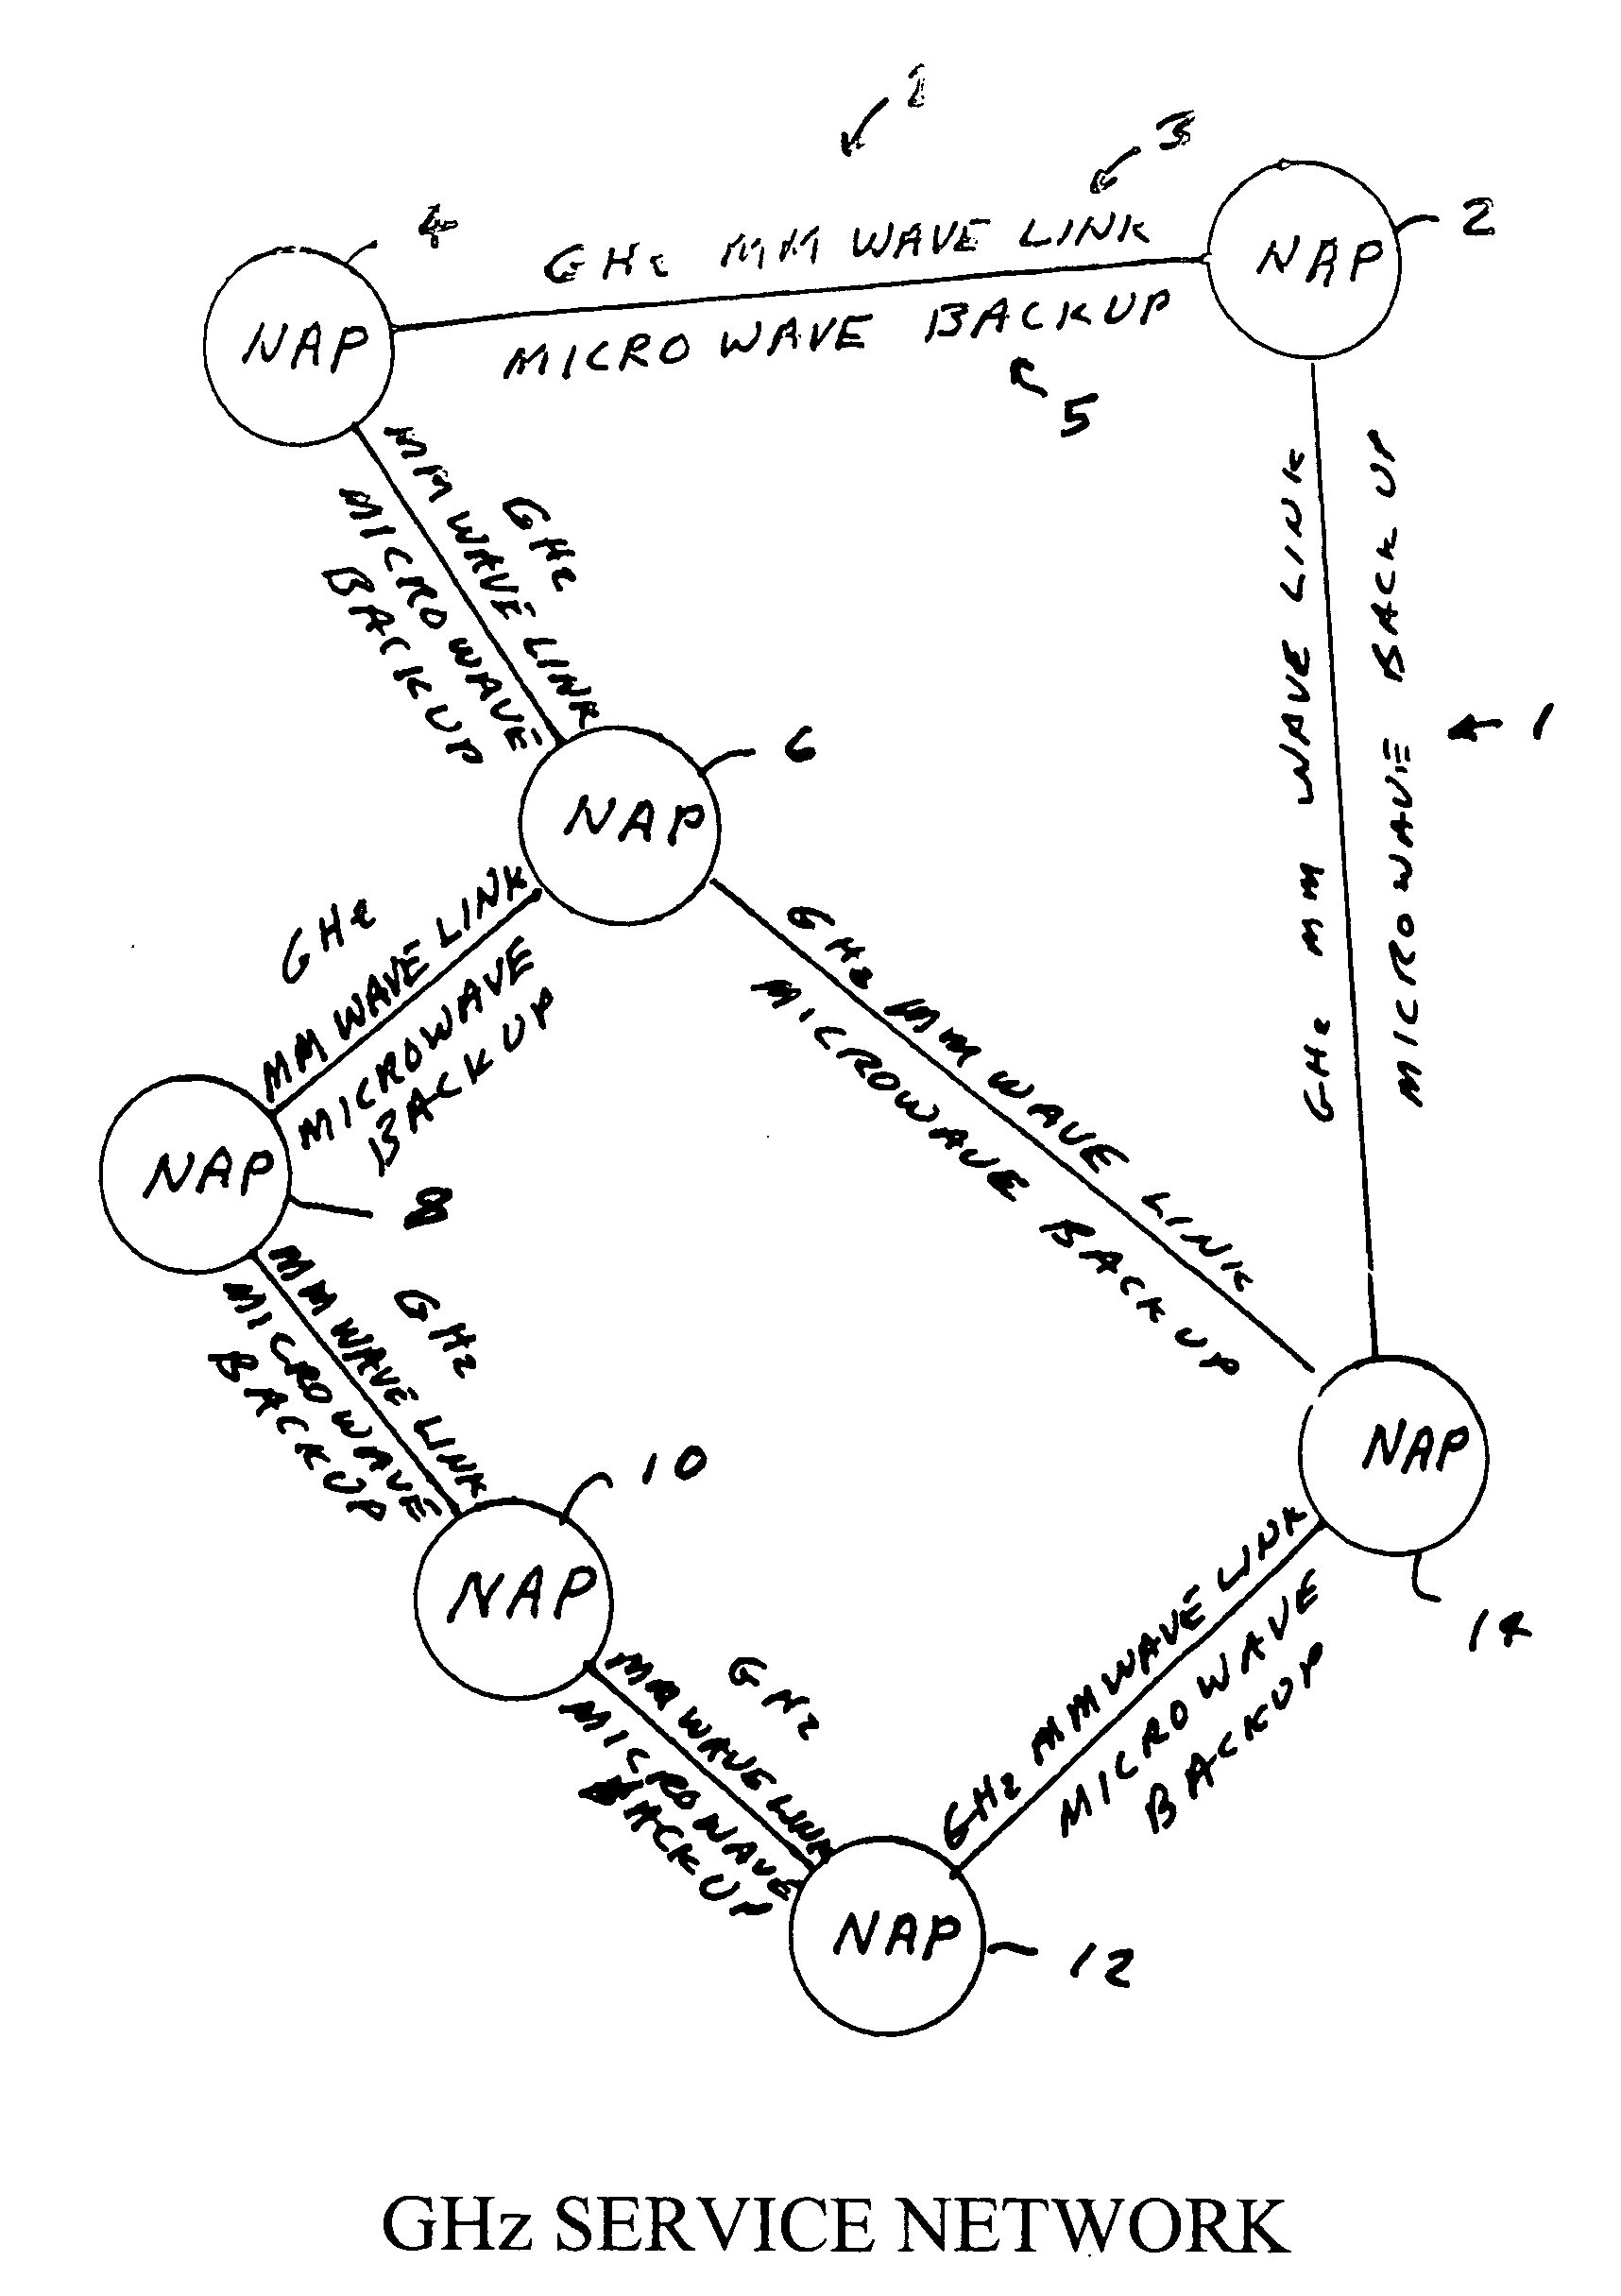 Circuit switched millimeter wave communication network